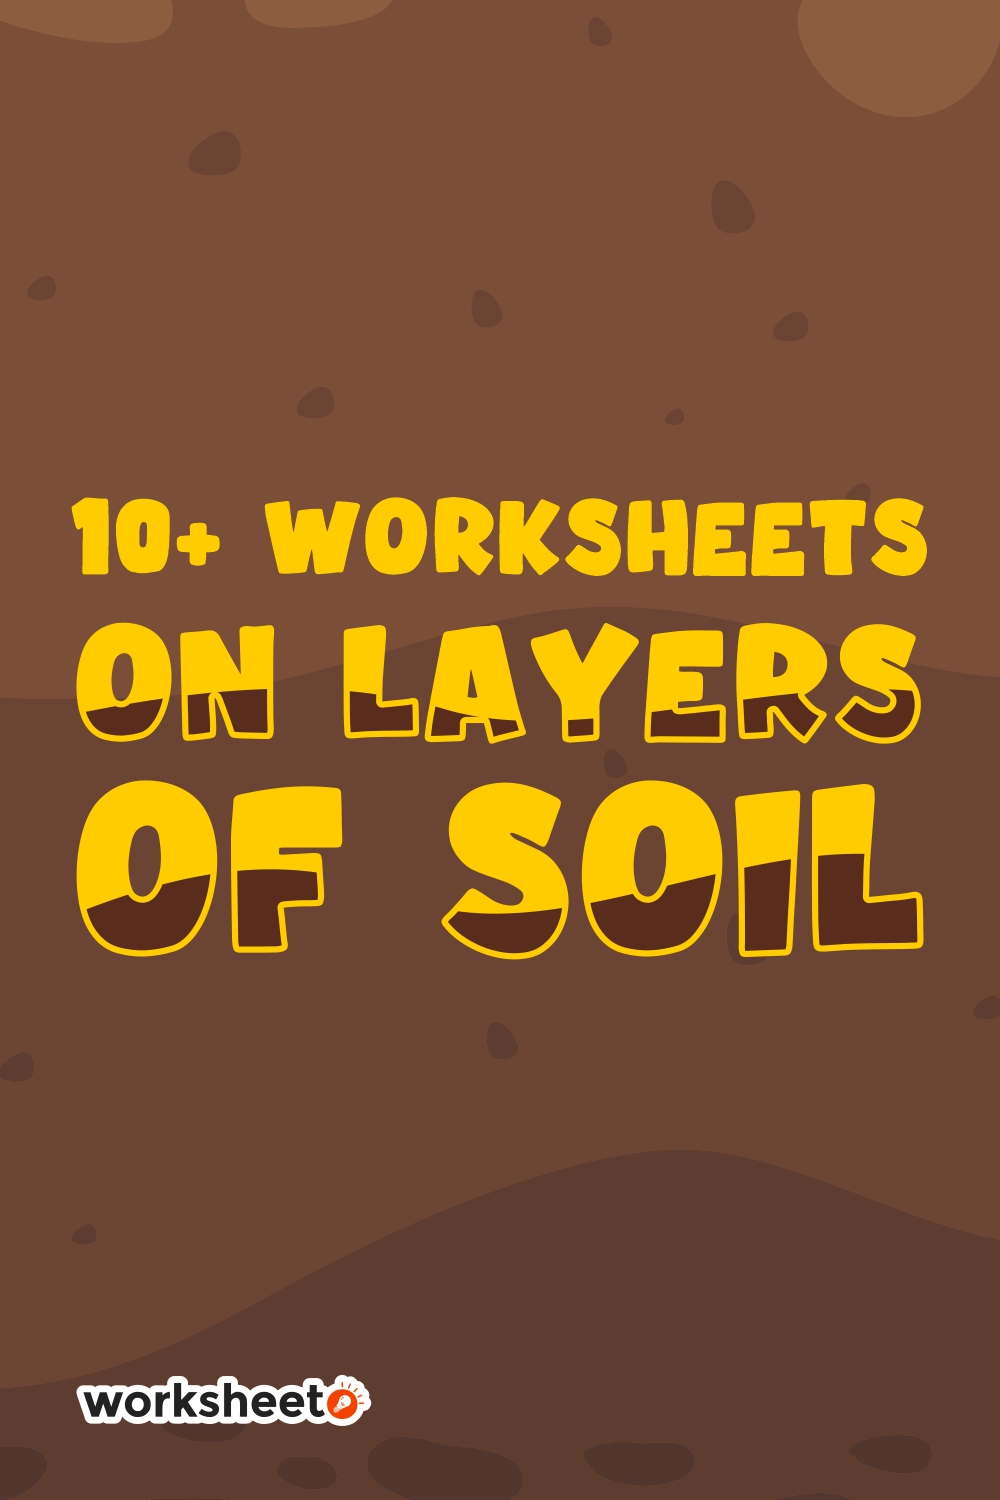 15 Images of Worksheets On Layers Of Soil